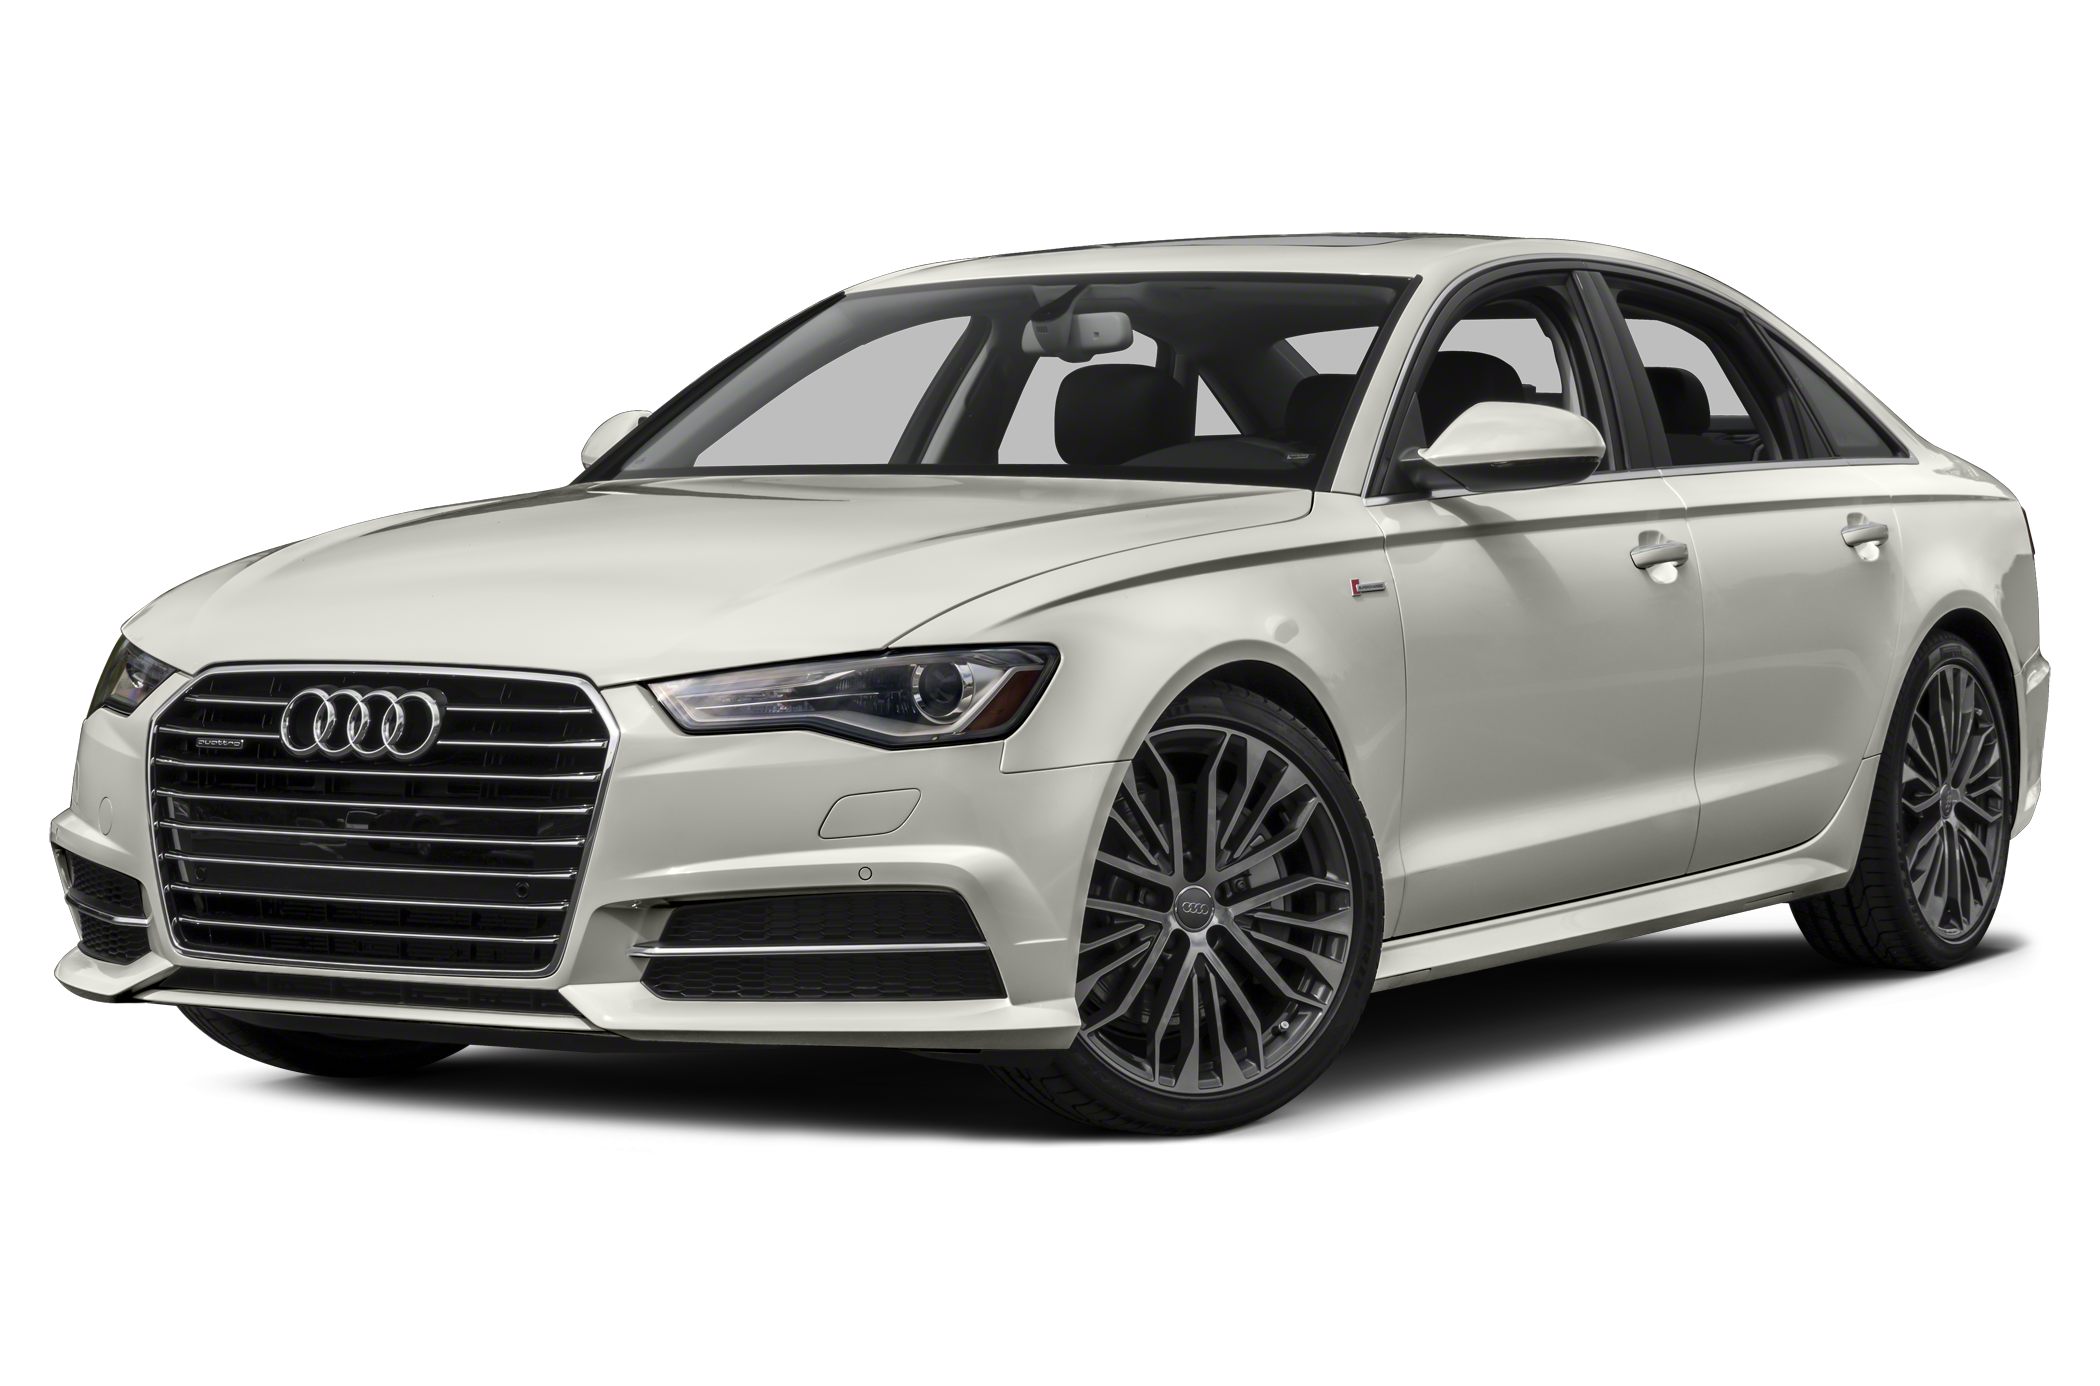 Audi A6 2017 HD Wallpapers